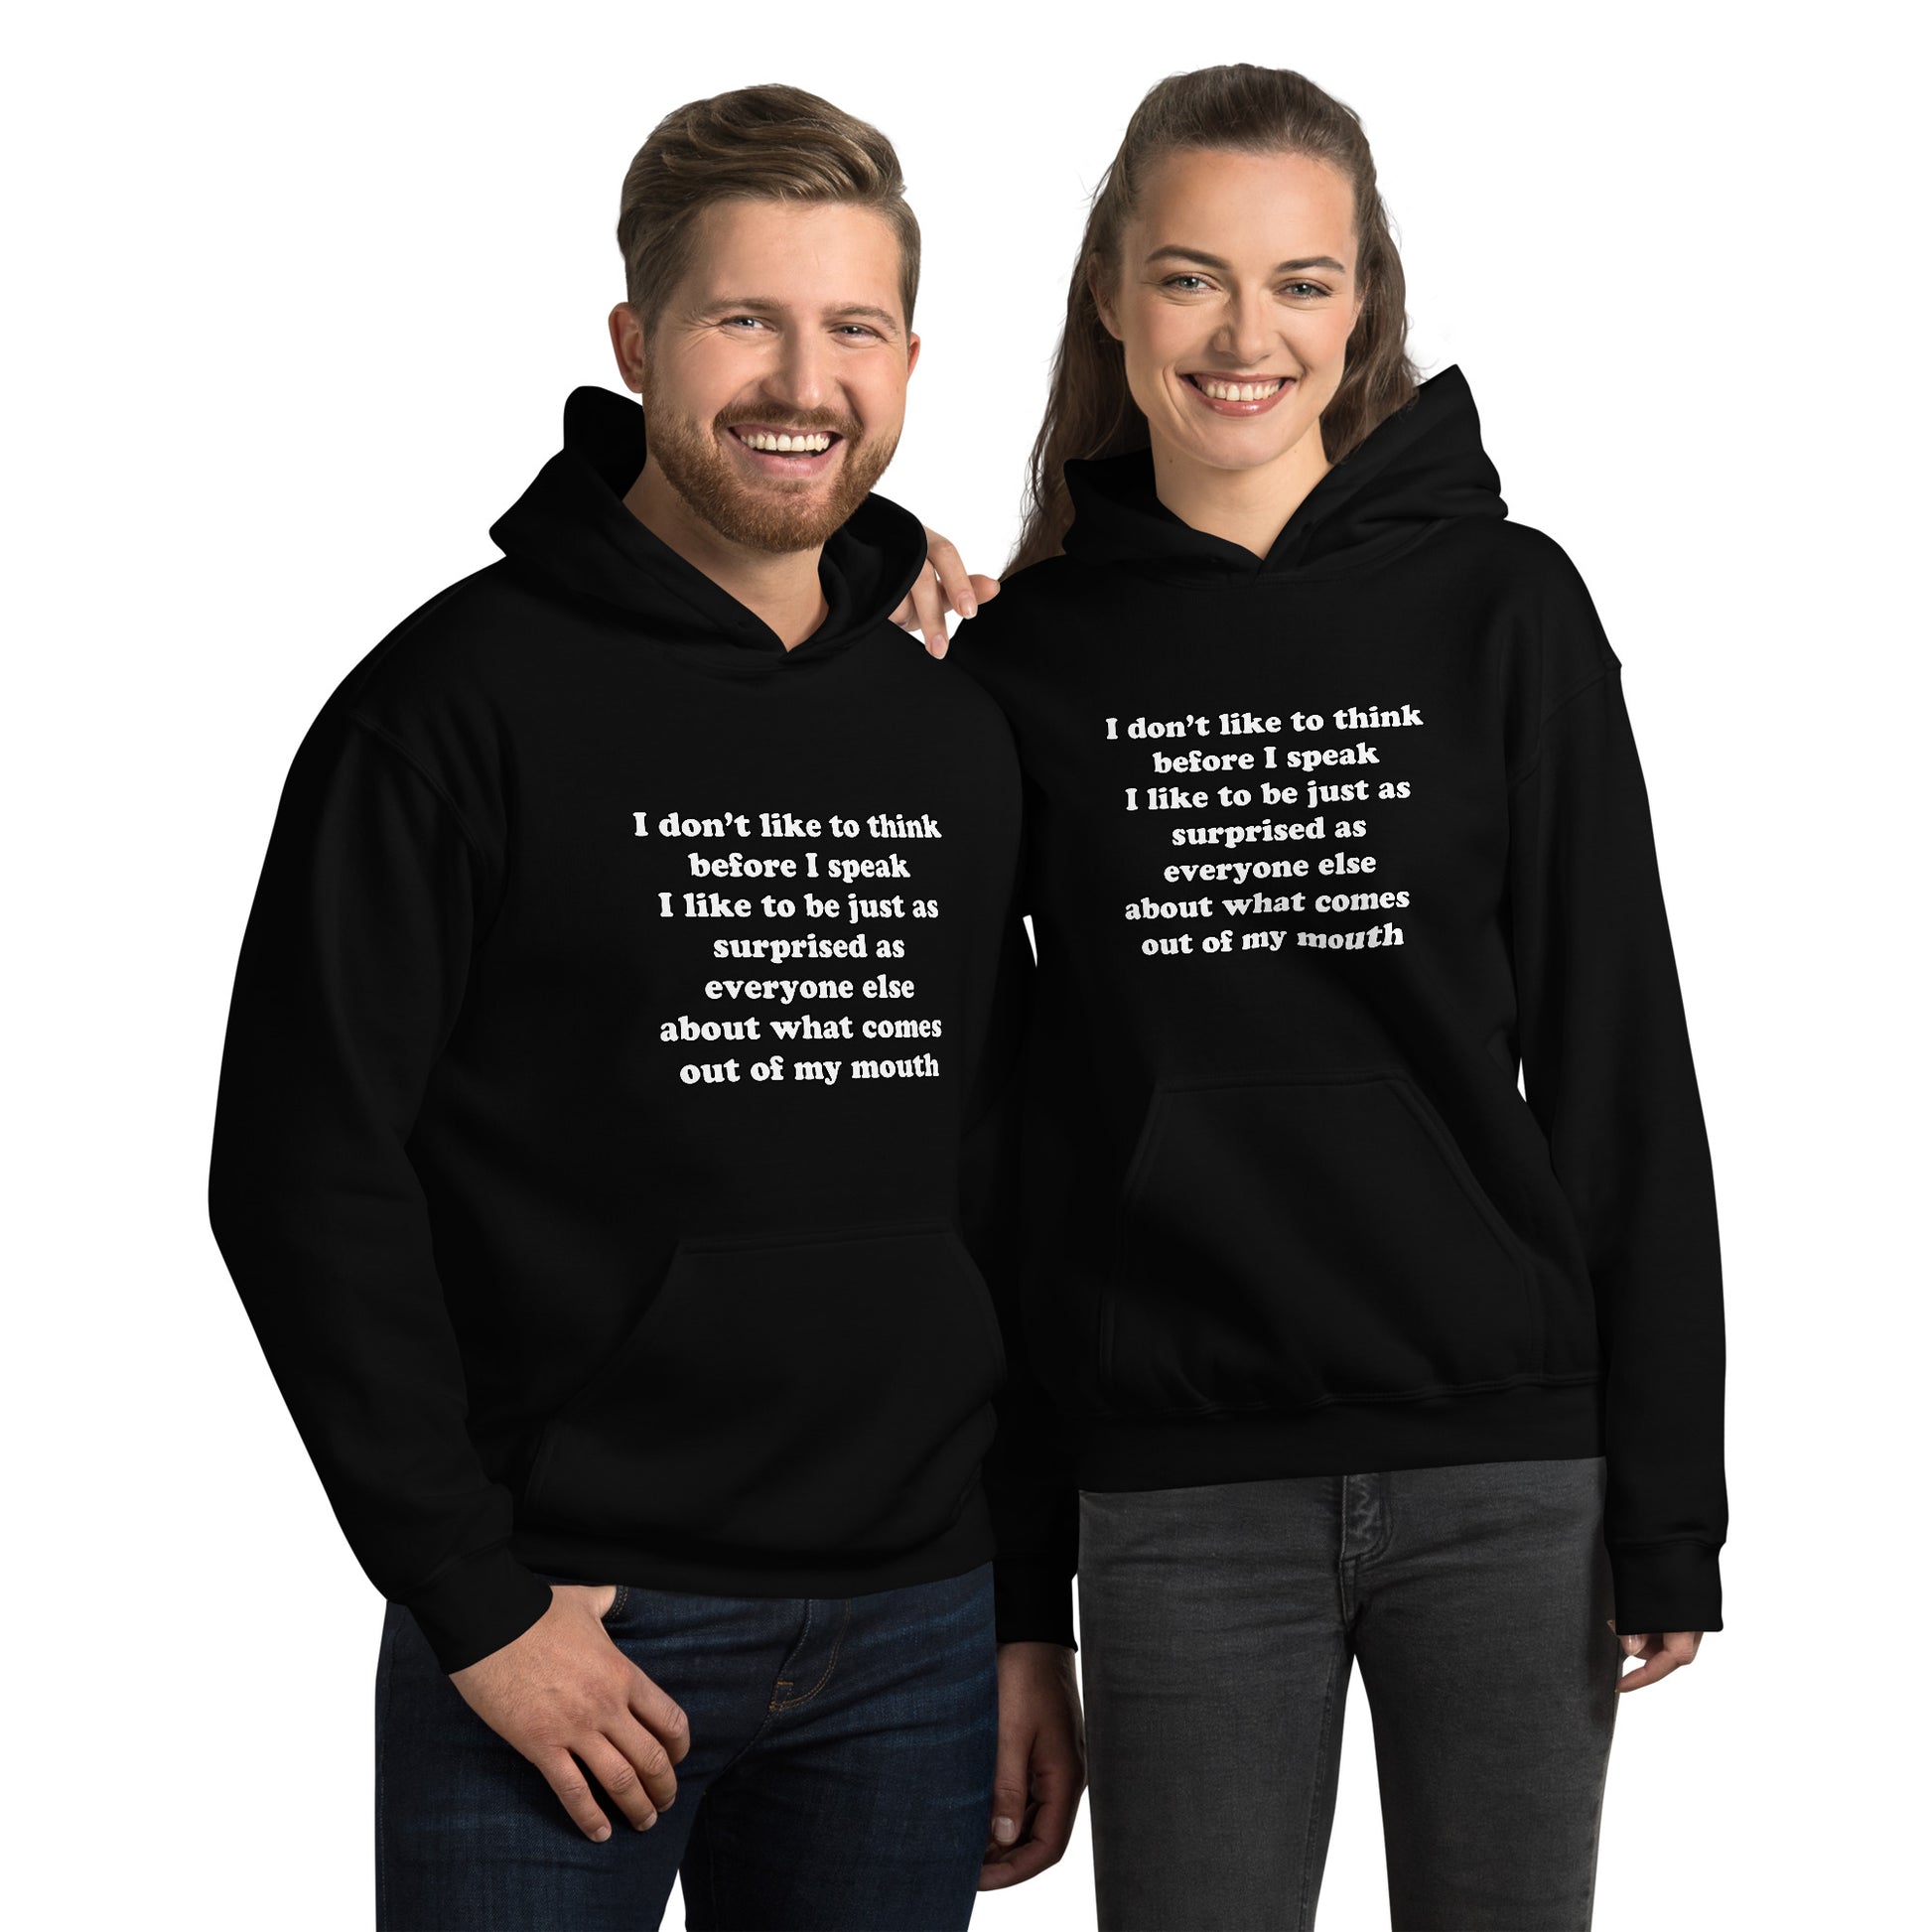 Man and woman with black hoodie with text “I don't think before I speak Just as serprised as everyone about what comes out of my mouth"